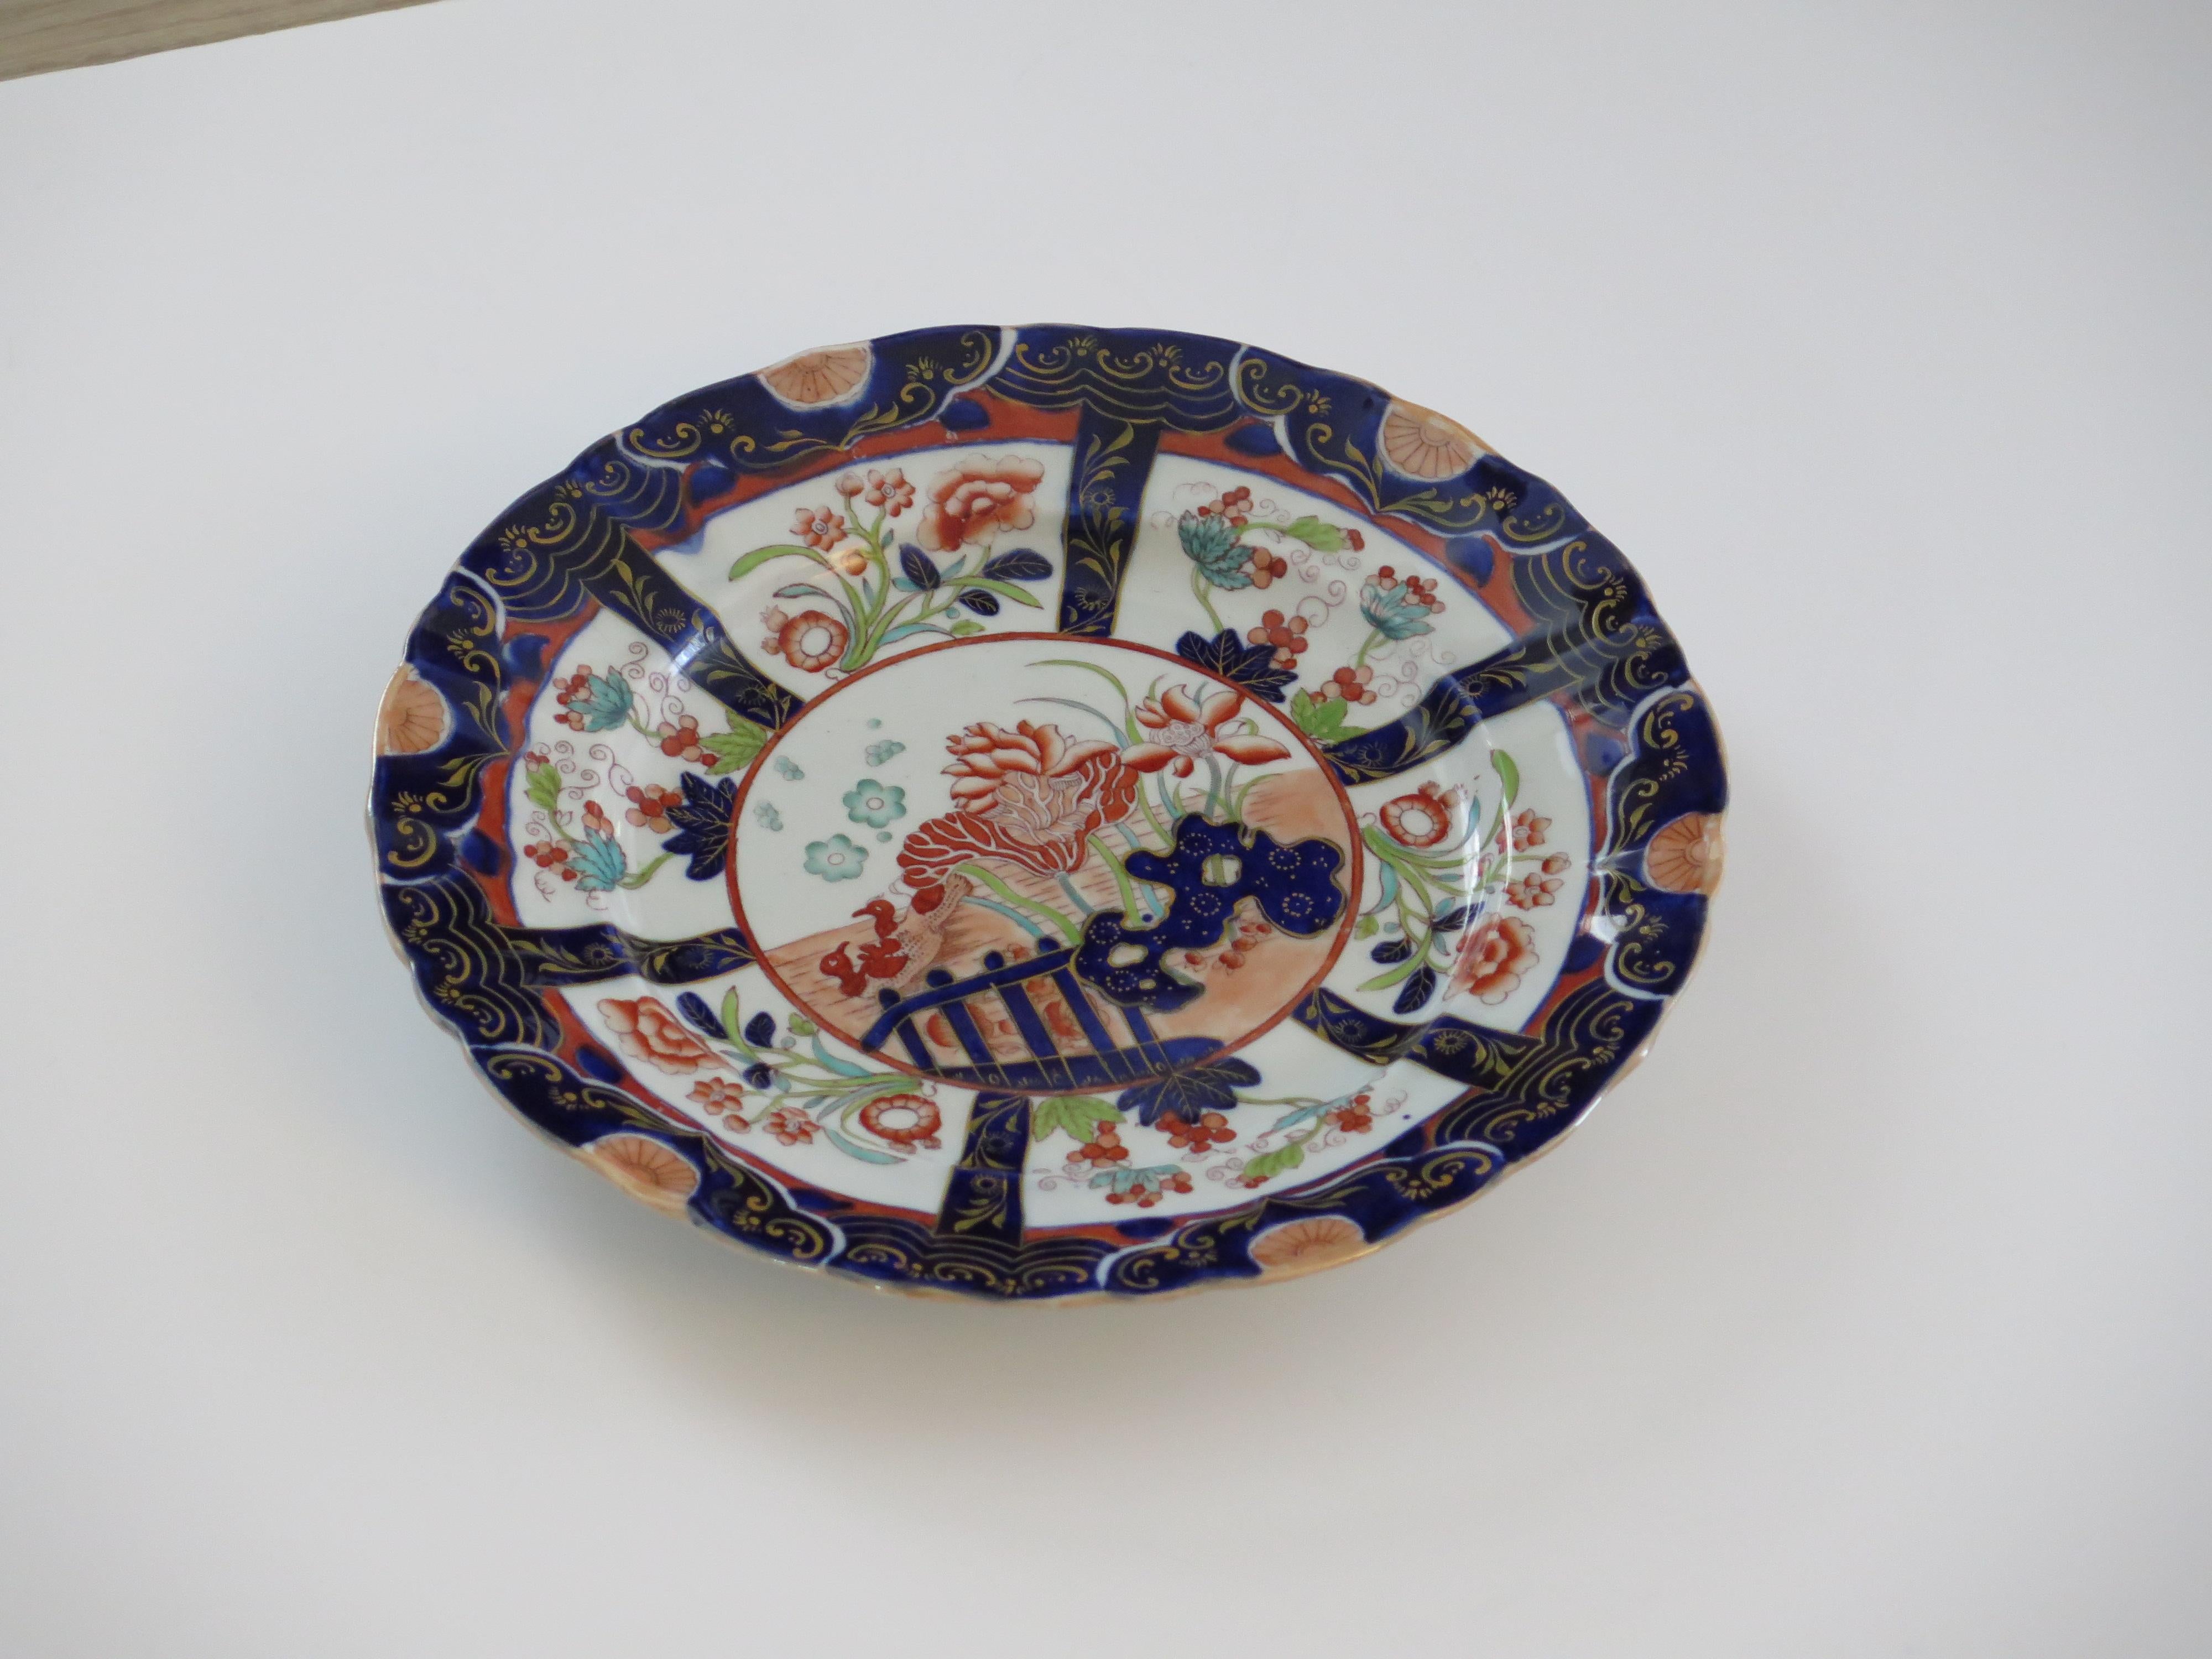 Chinoiserie Masons Ironstone Large Dinner Plate in rare Muscove Duck & Fence Ptn, Ca 1840 For Sale